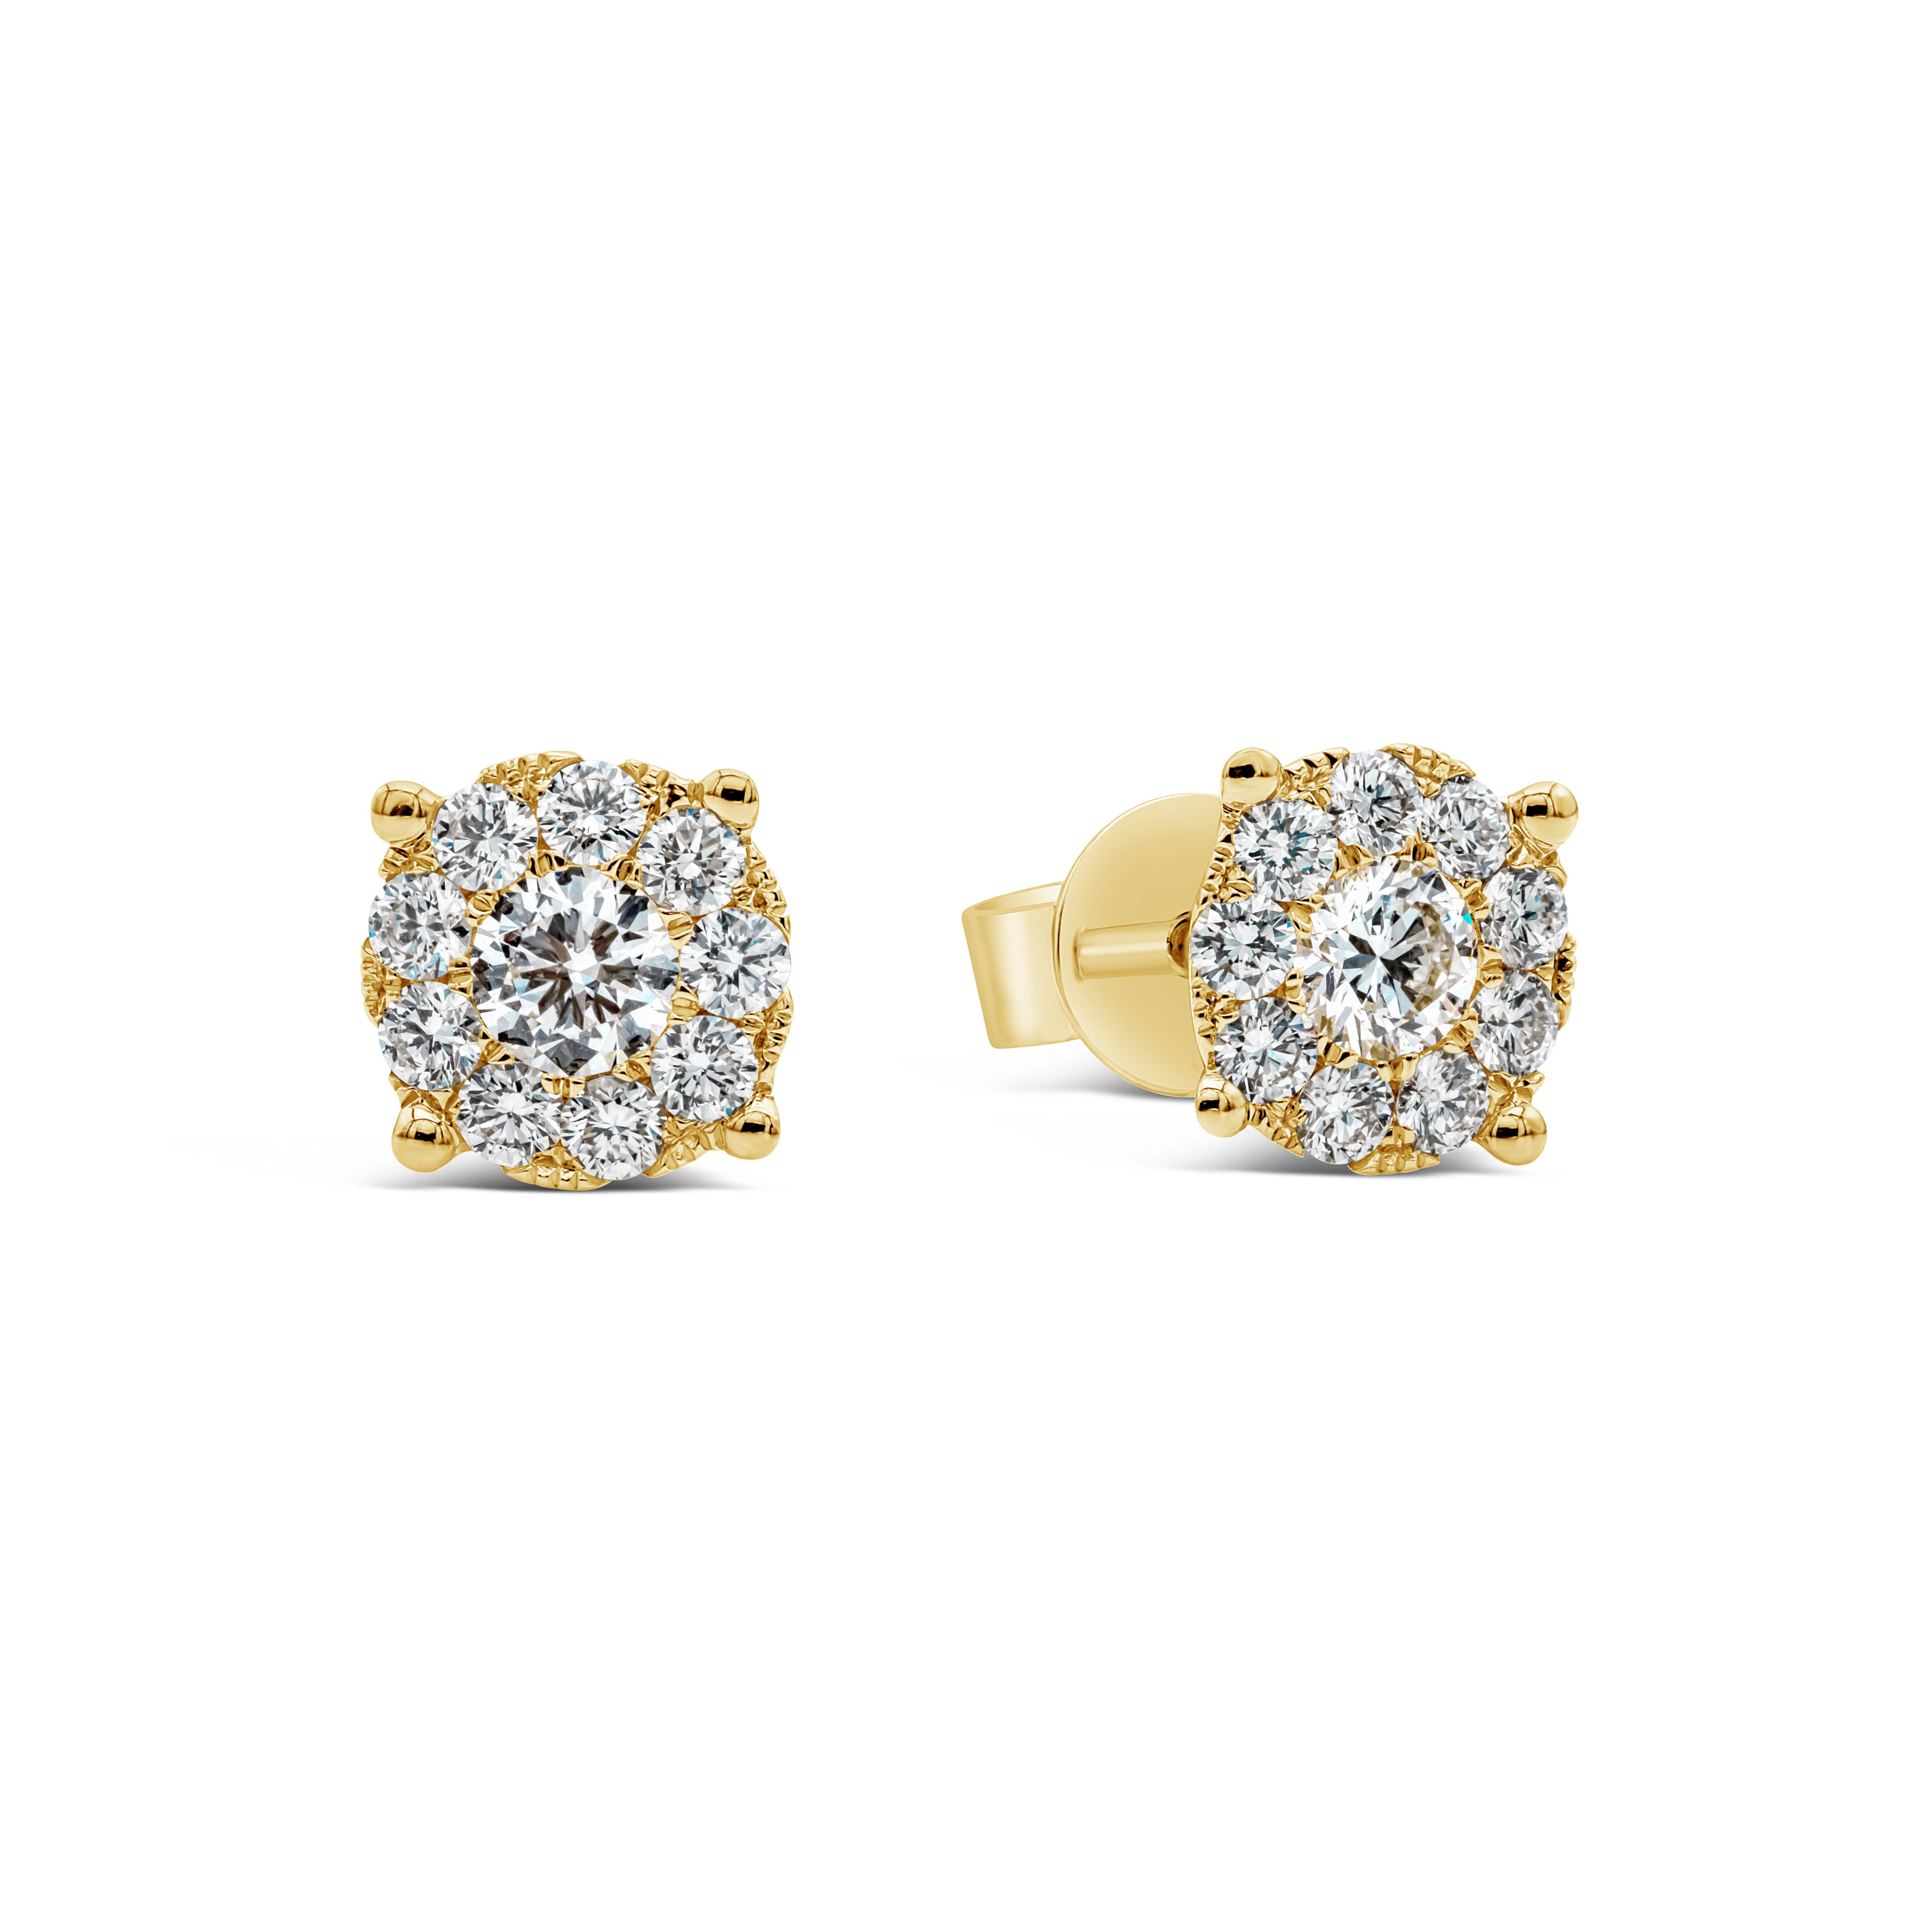 A classic pair of stud earrings showcasing a cluster of 20 round brilliant diamonds set in an 18k yellow gold mounting. Diamonds weigh 0.83 carats total and are approximately FG color, VS/SI clarity. 

Style available in different price ranges.